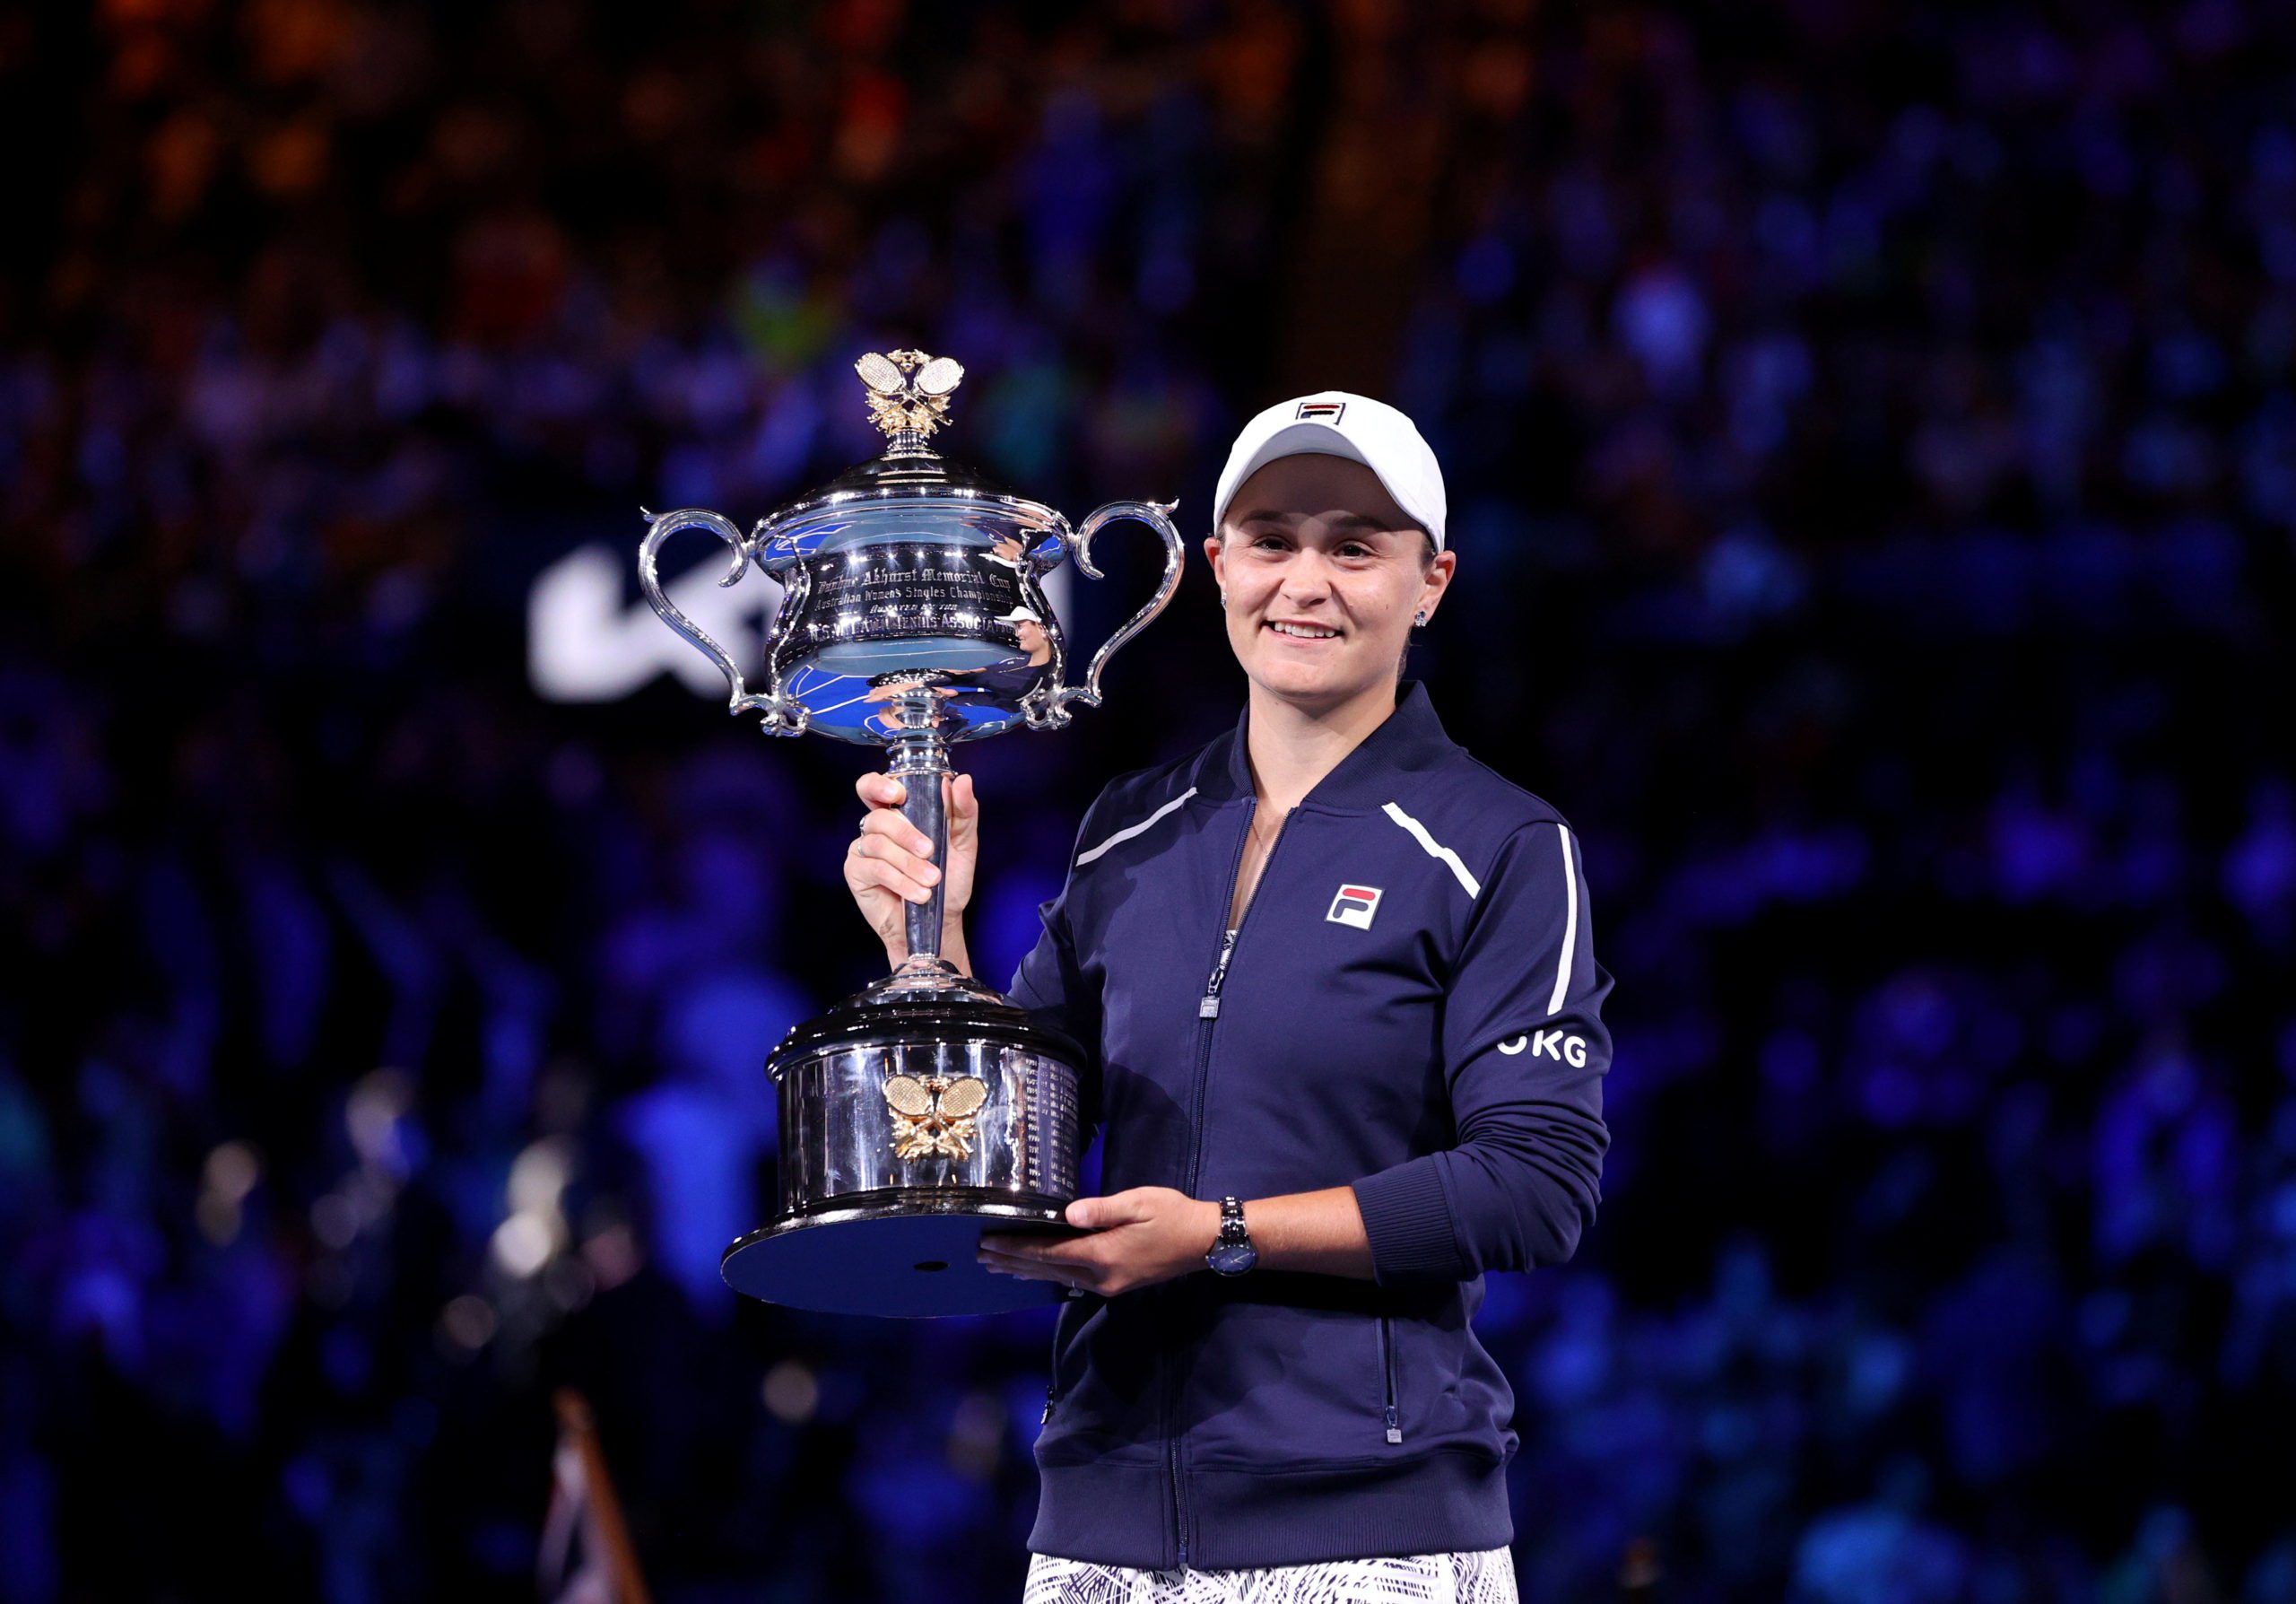 Tennis-‘I am spent’: World number one Barty goes out on top